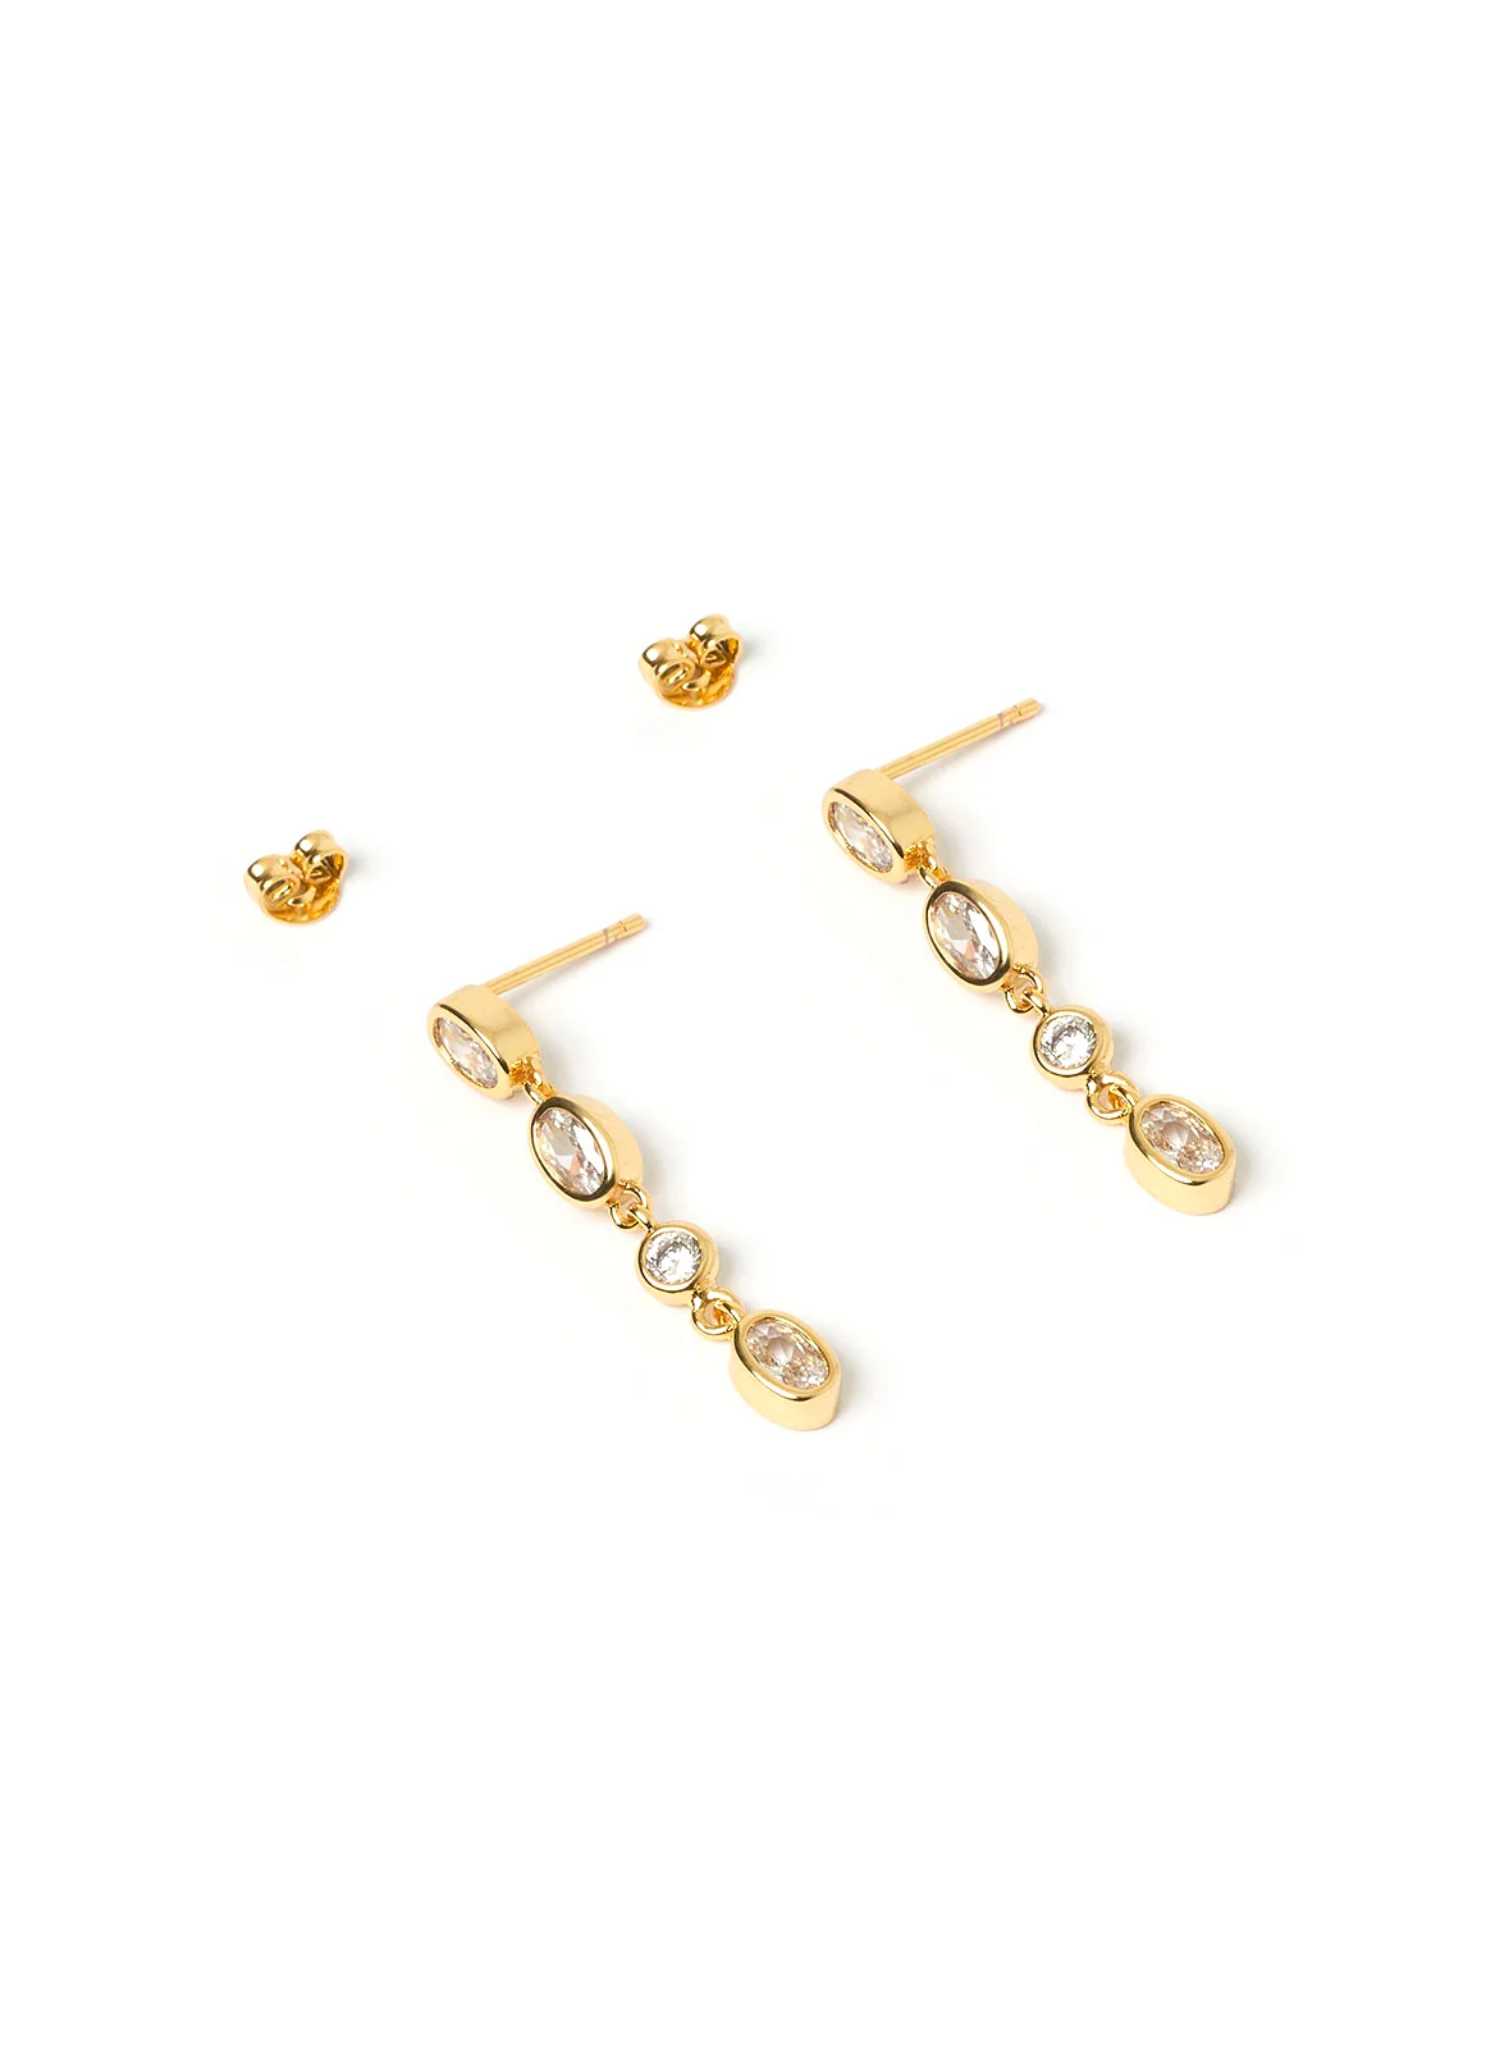 Sparkle and shine with the gorgeous and grand Isadora Earrings. With a beautiful gold and stone drop, this luxe pair of earrings will instantly turn your look into regal glamour!